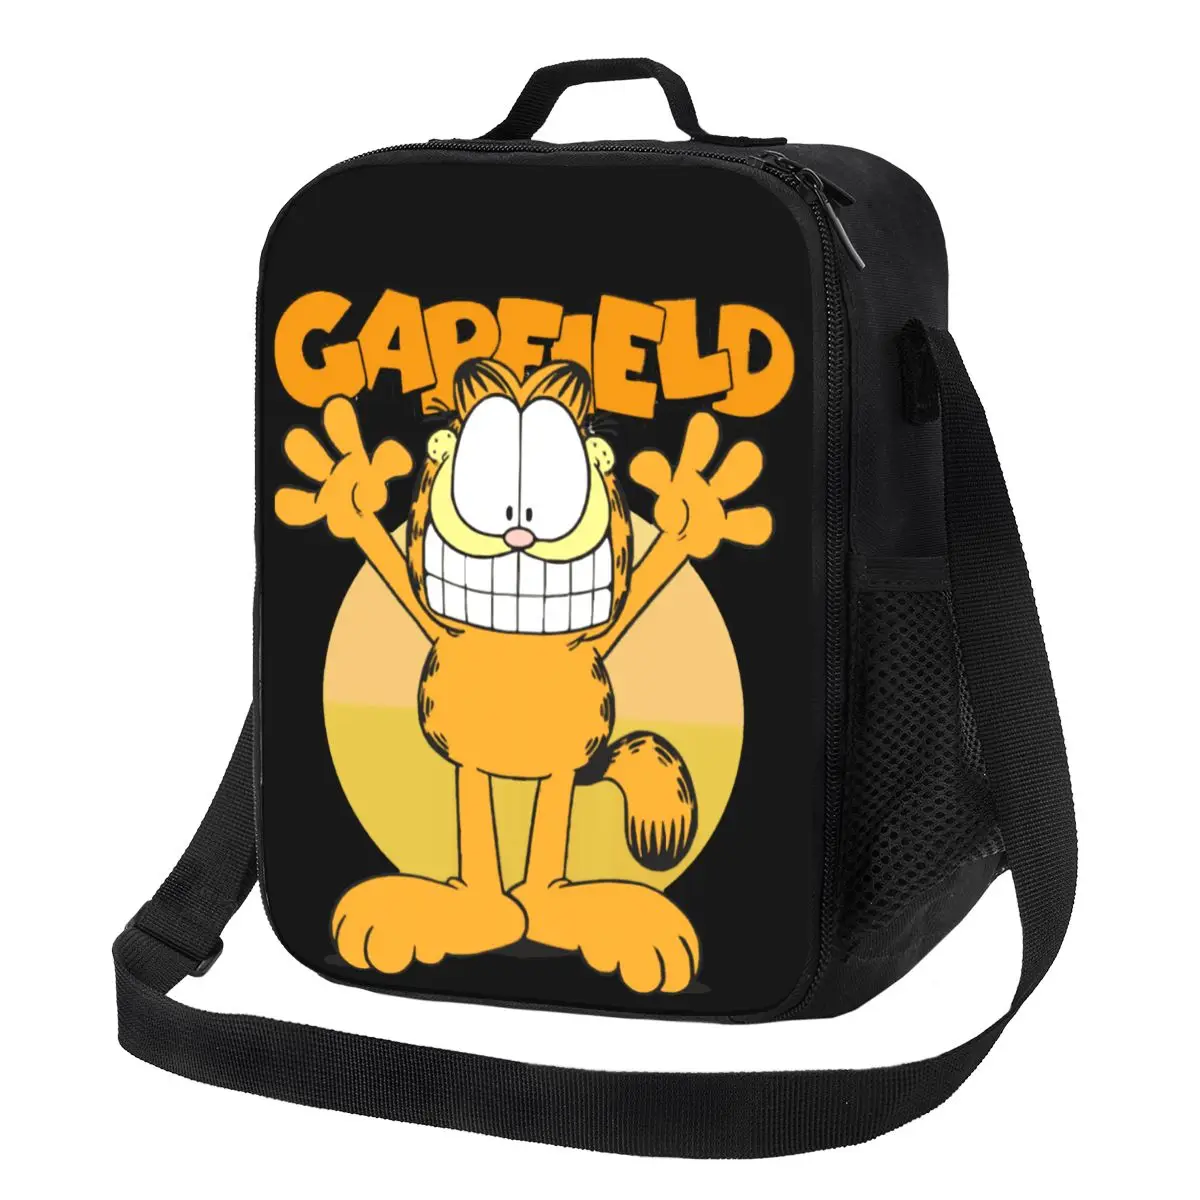 Garfields Cat Insulated Lunch Bags for Women Cowboy Garf Portable Thermal Cooler Food Bento Box School